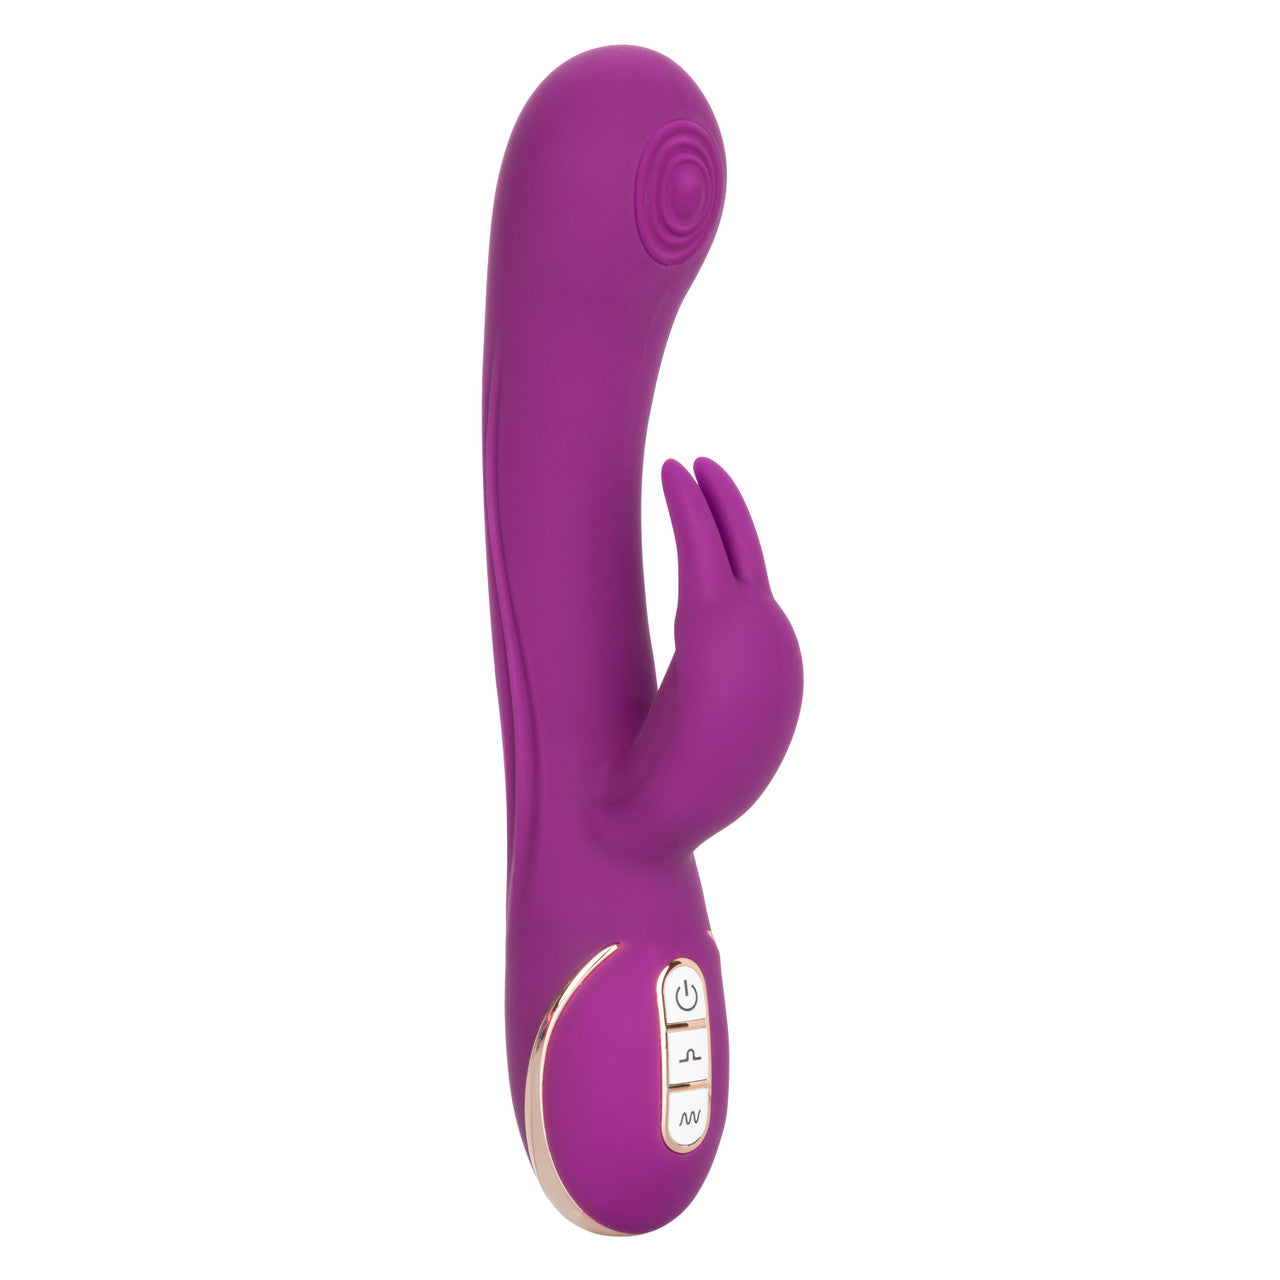 Jack Rabbit Signature Silicone Thumping Rabbit - Thorn & Feather